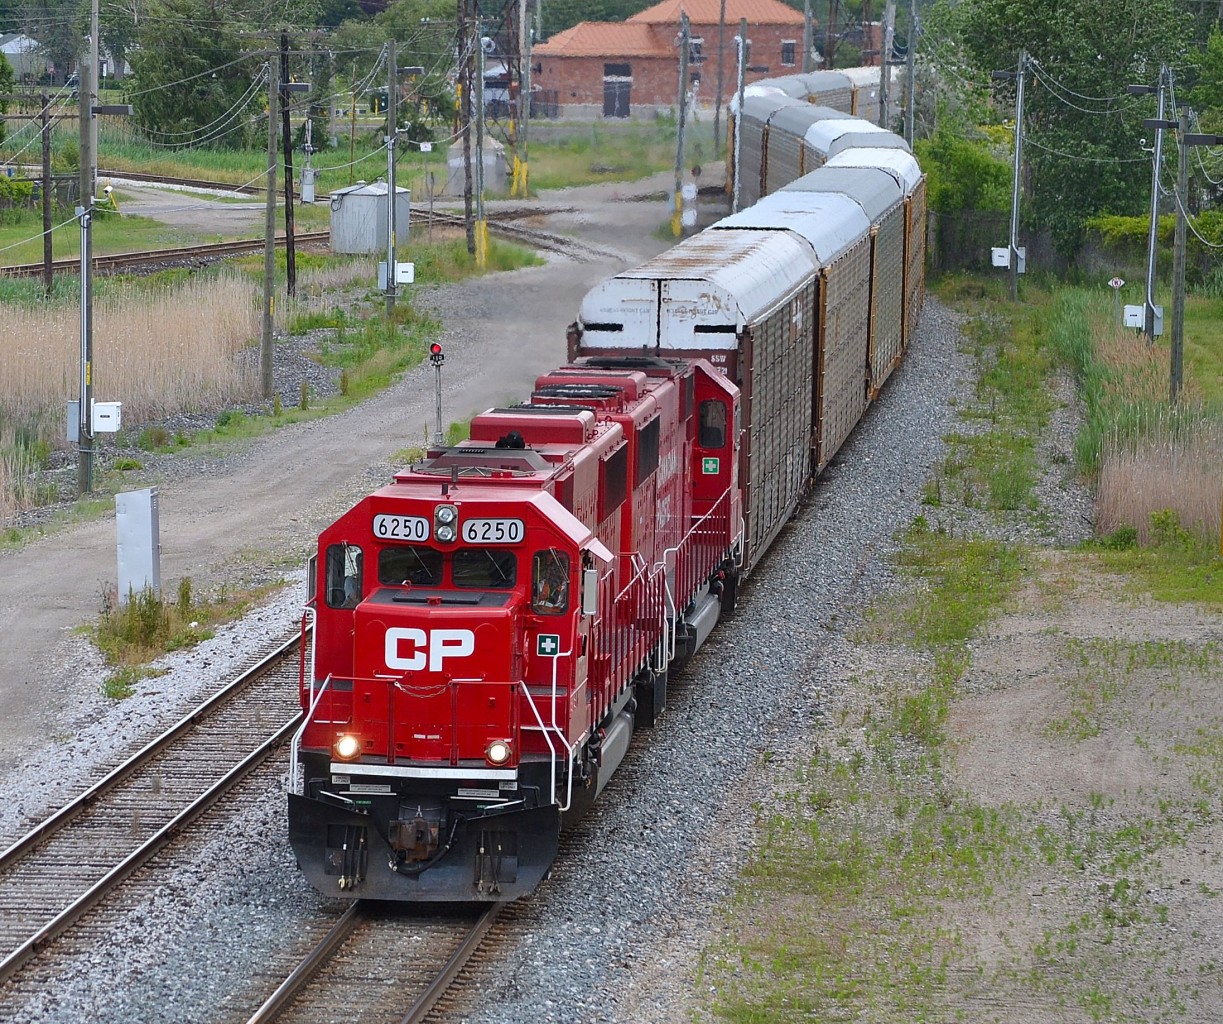 CP 245 led by rebuilt CPs (ex SOOs) 6250 and 6225 head west towards the Detroit-Windsor tunnel as they approach the Ouellette Ave overpass.